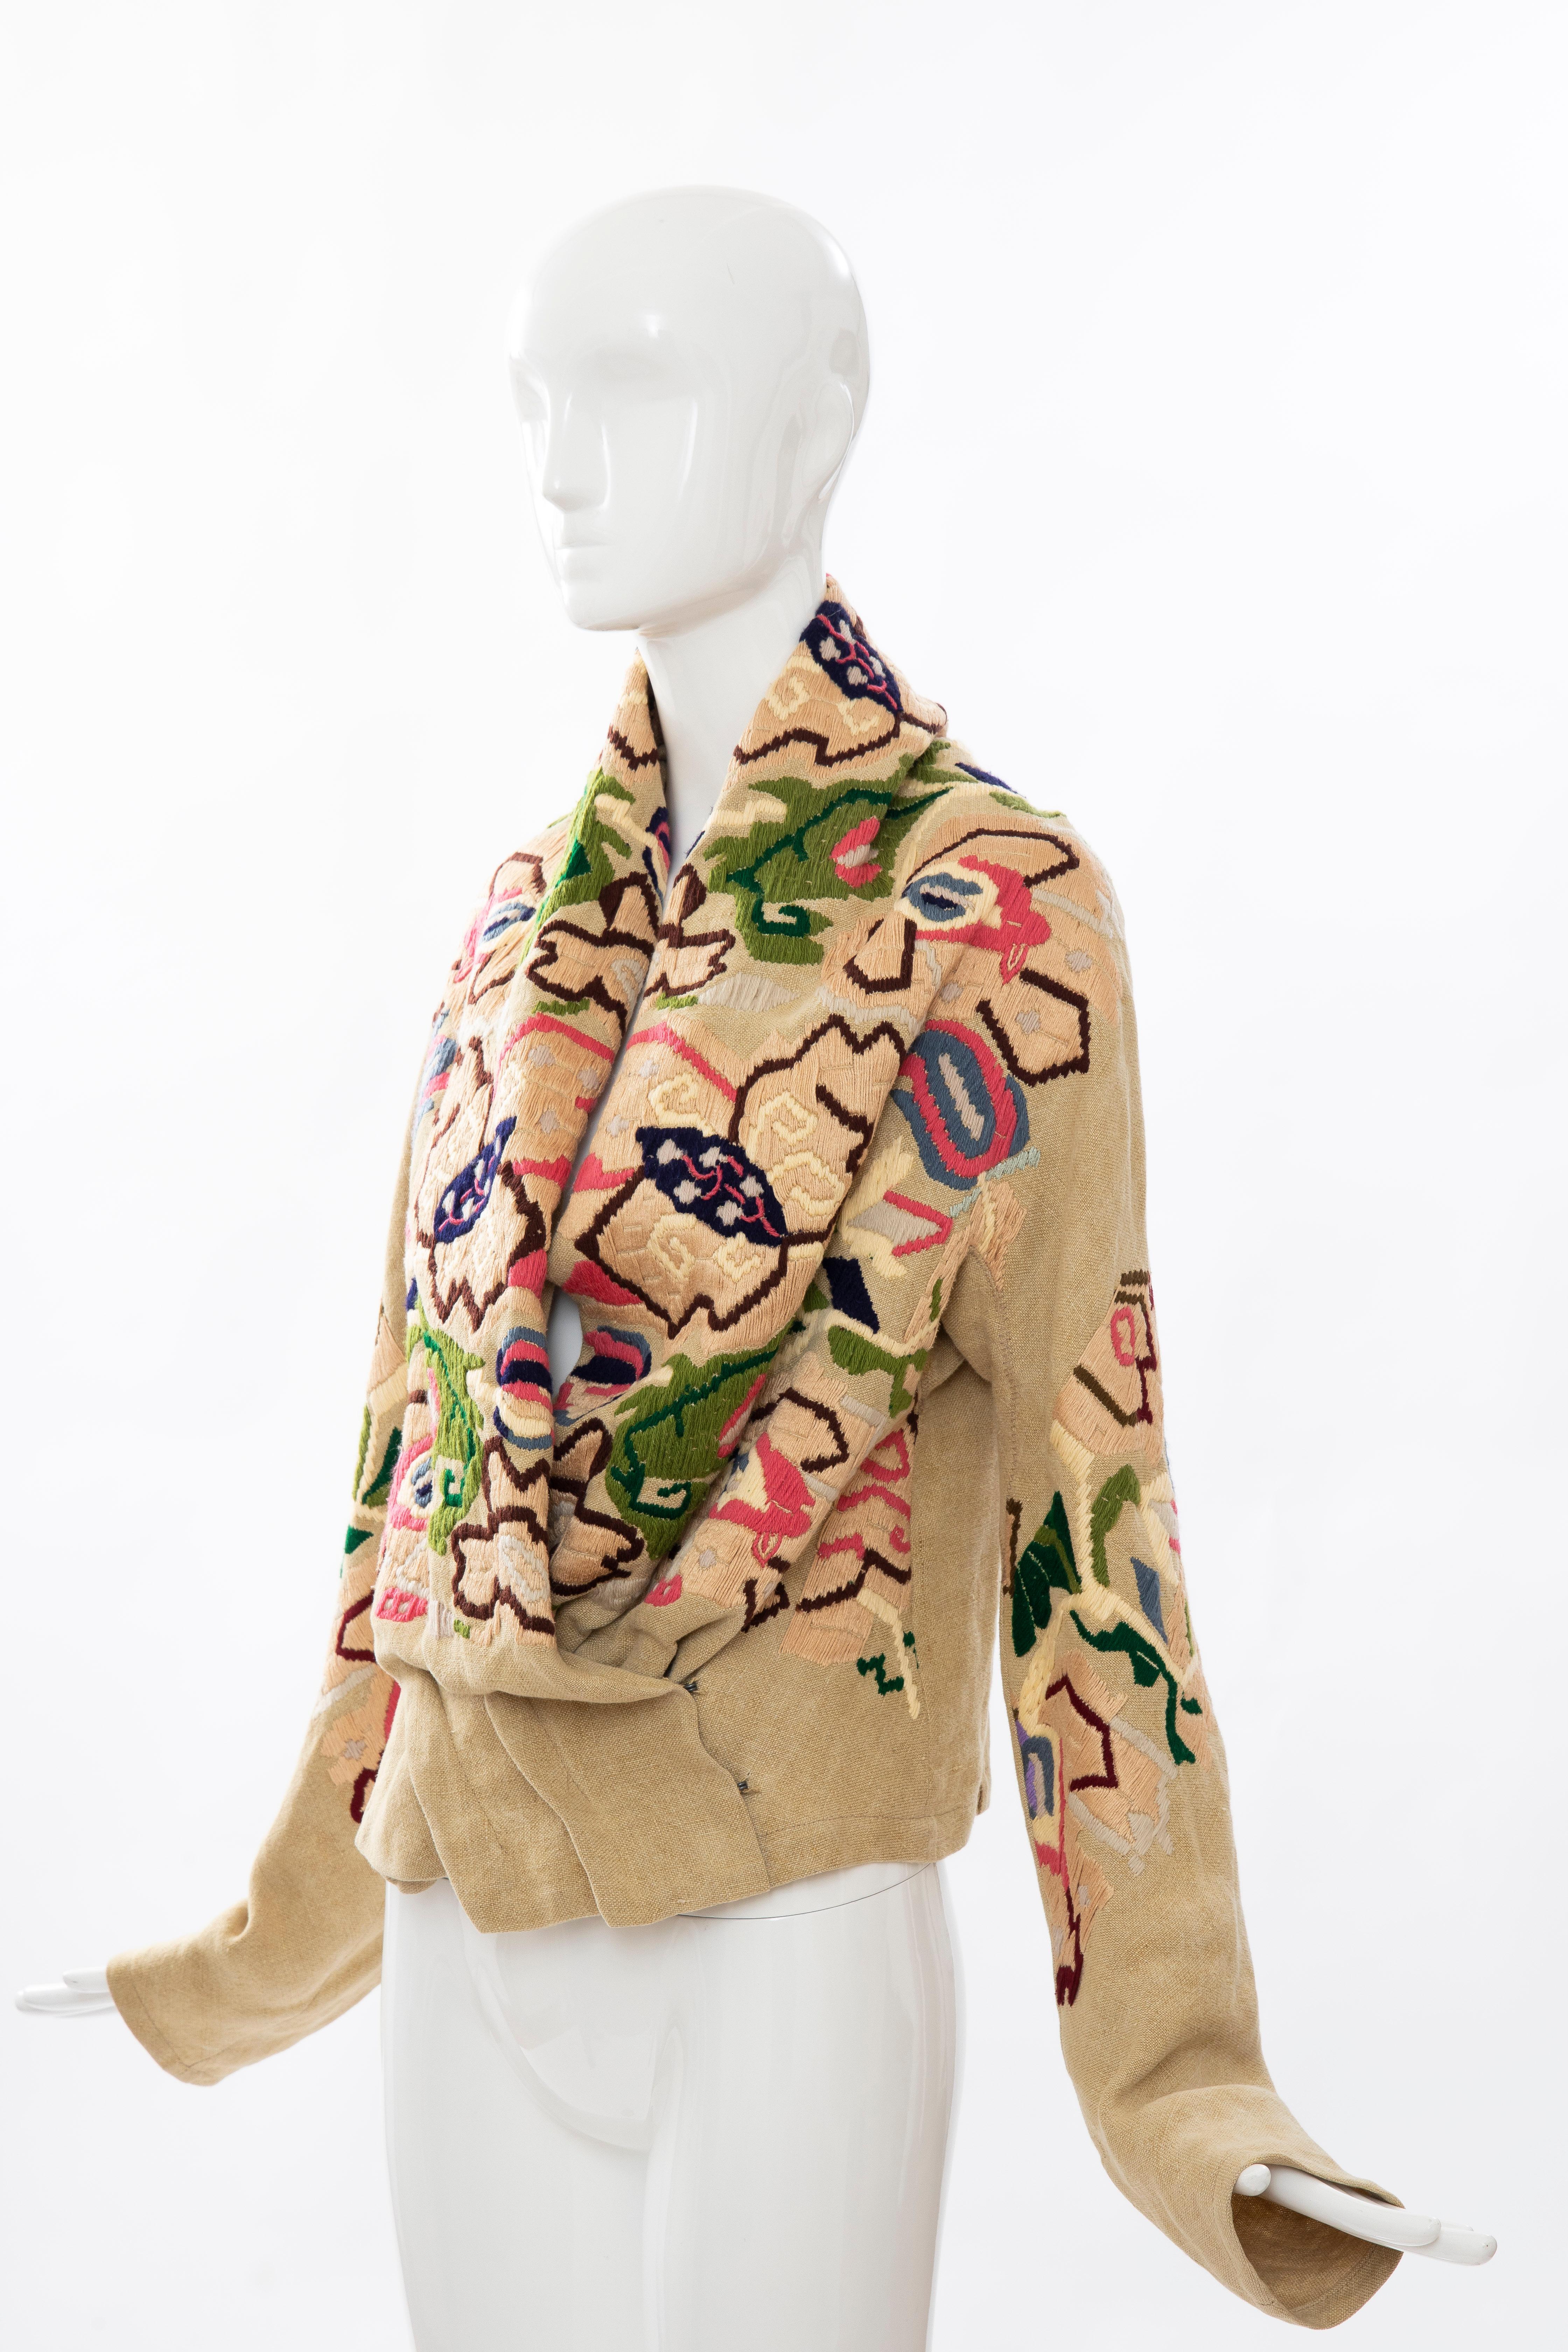 Dries Van Noten Runway Floral Embroidered Linen Jacket, Fall 2002 For Sale 2